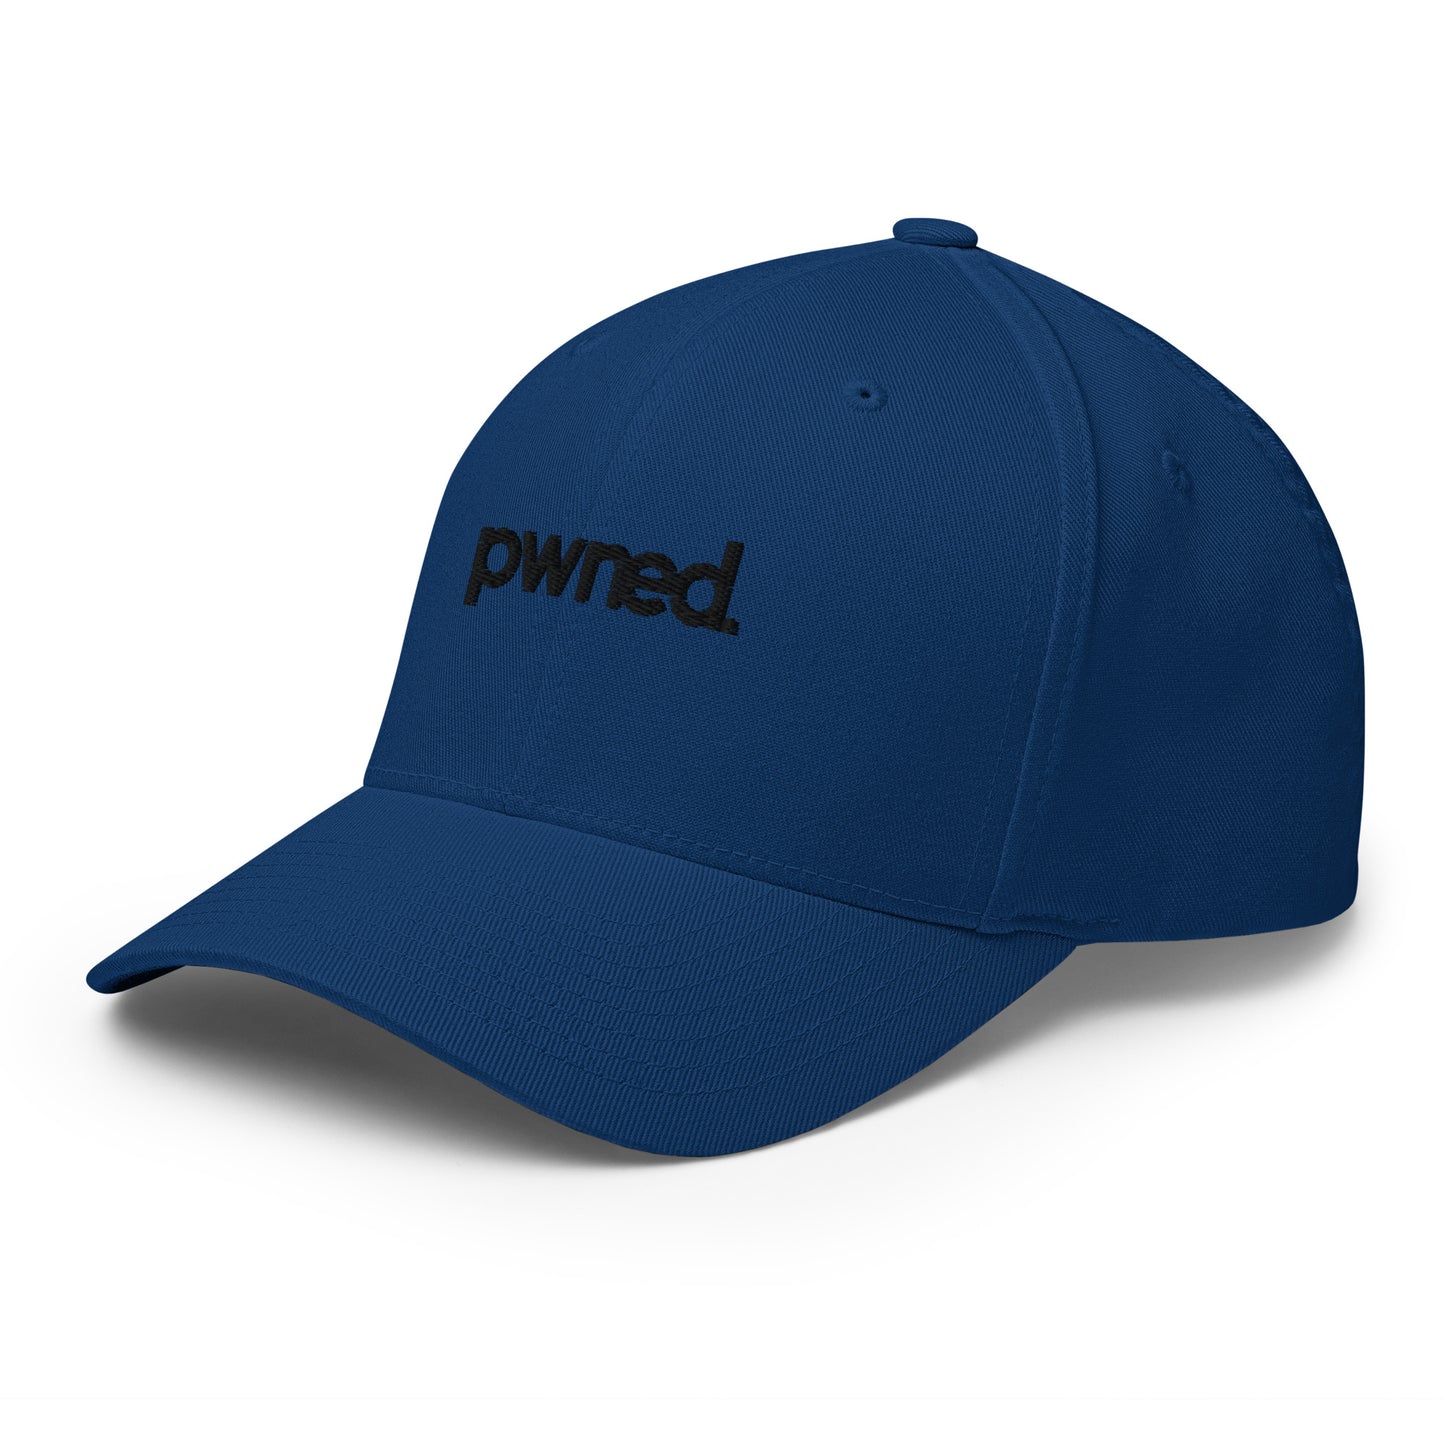 cap-from-the-front-with-pwned-symbol